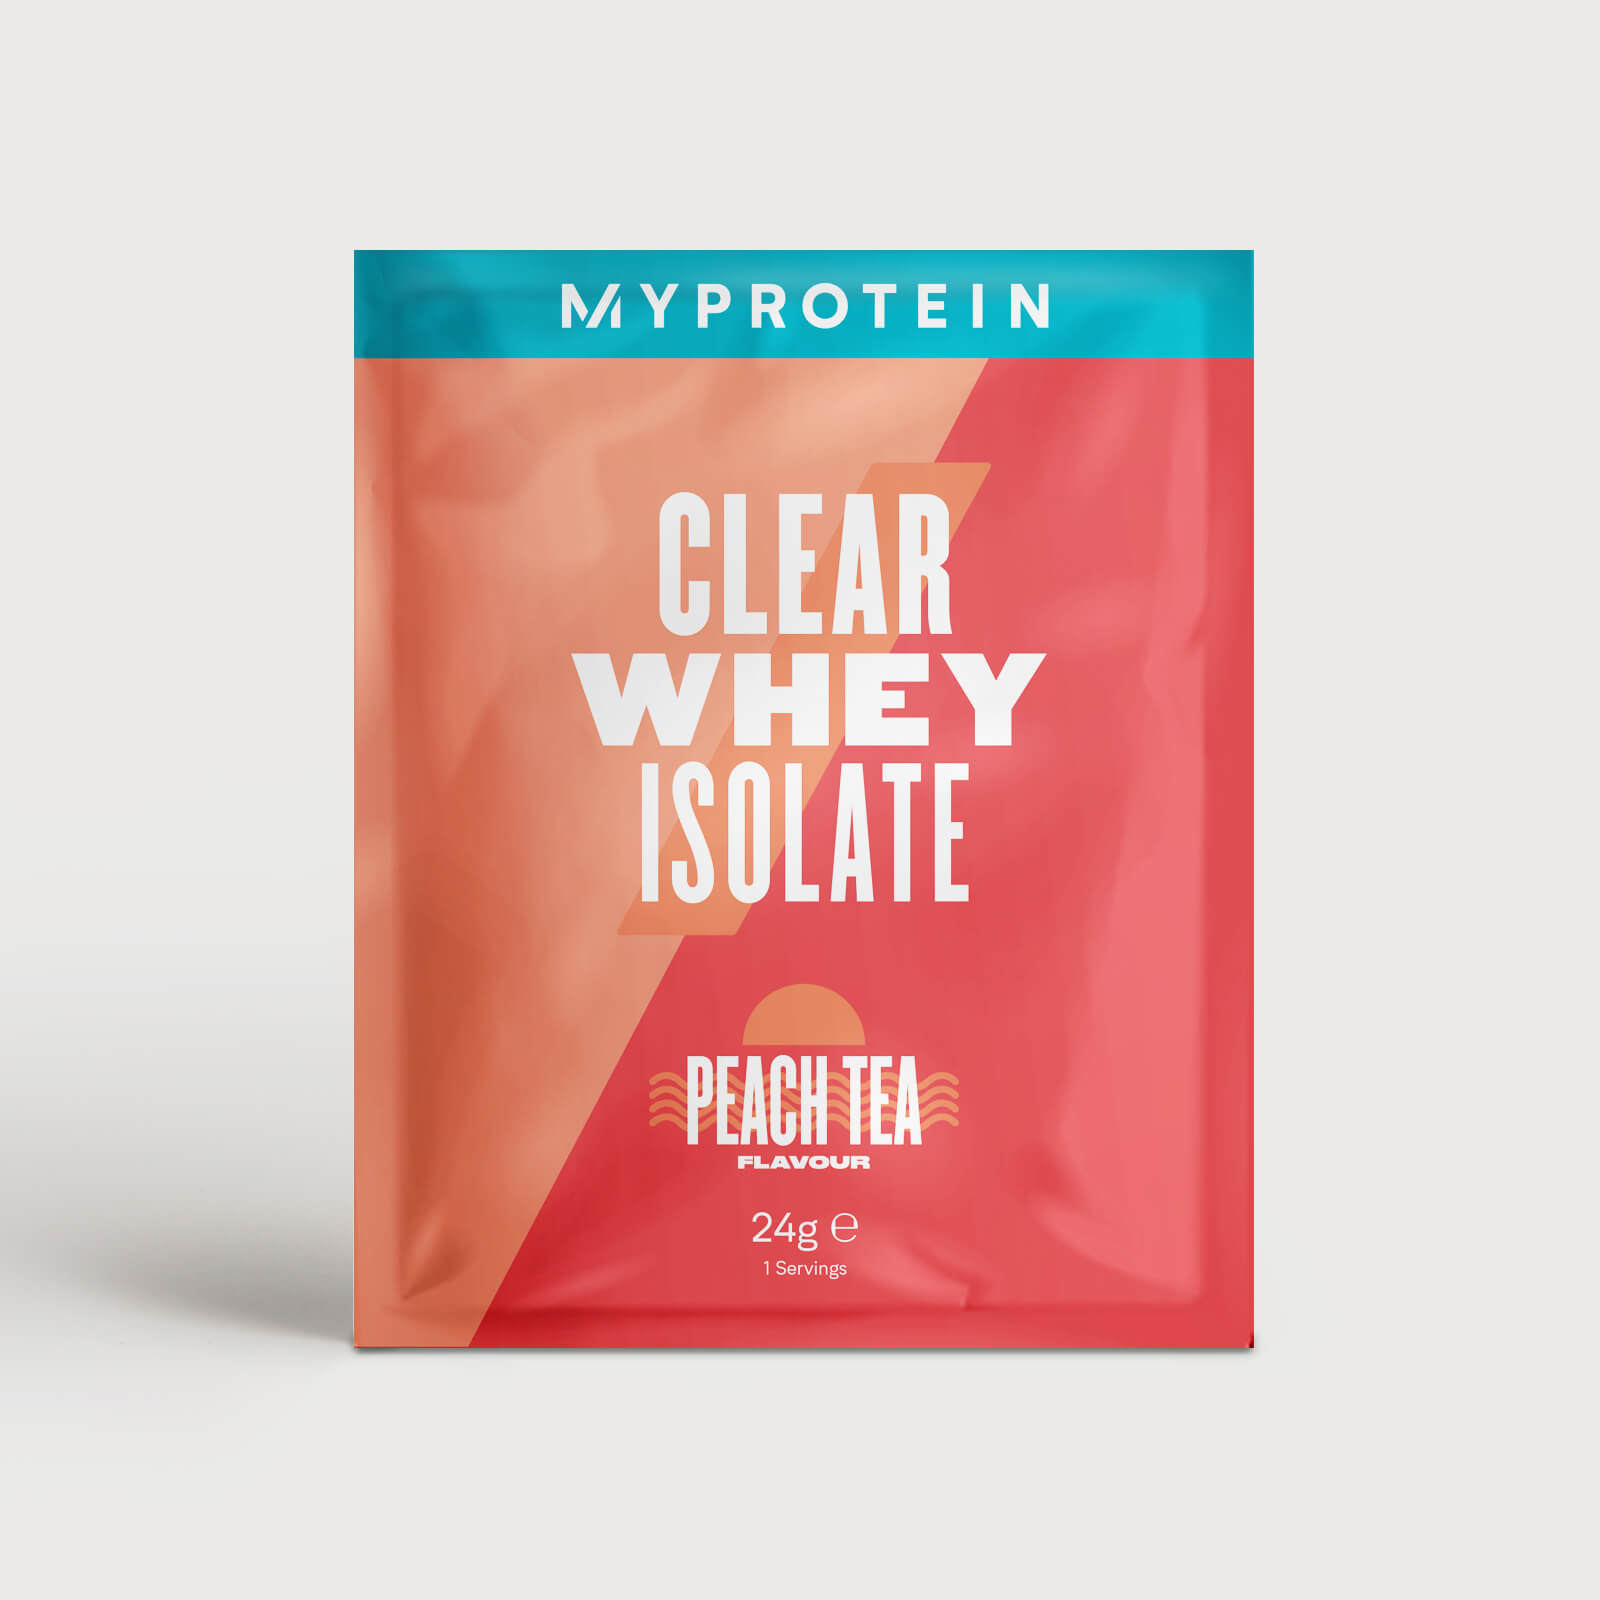 Myprotein Clear Whey Isolate (Sample) - 1servings - ชาพีช